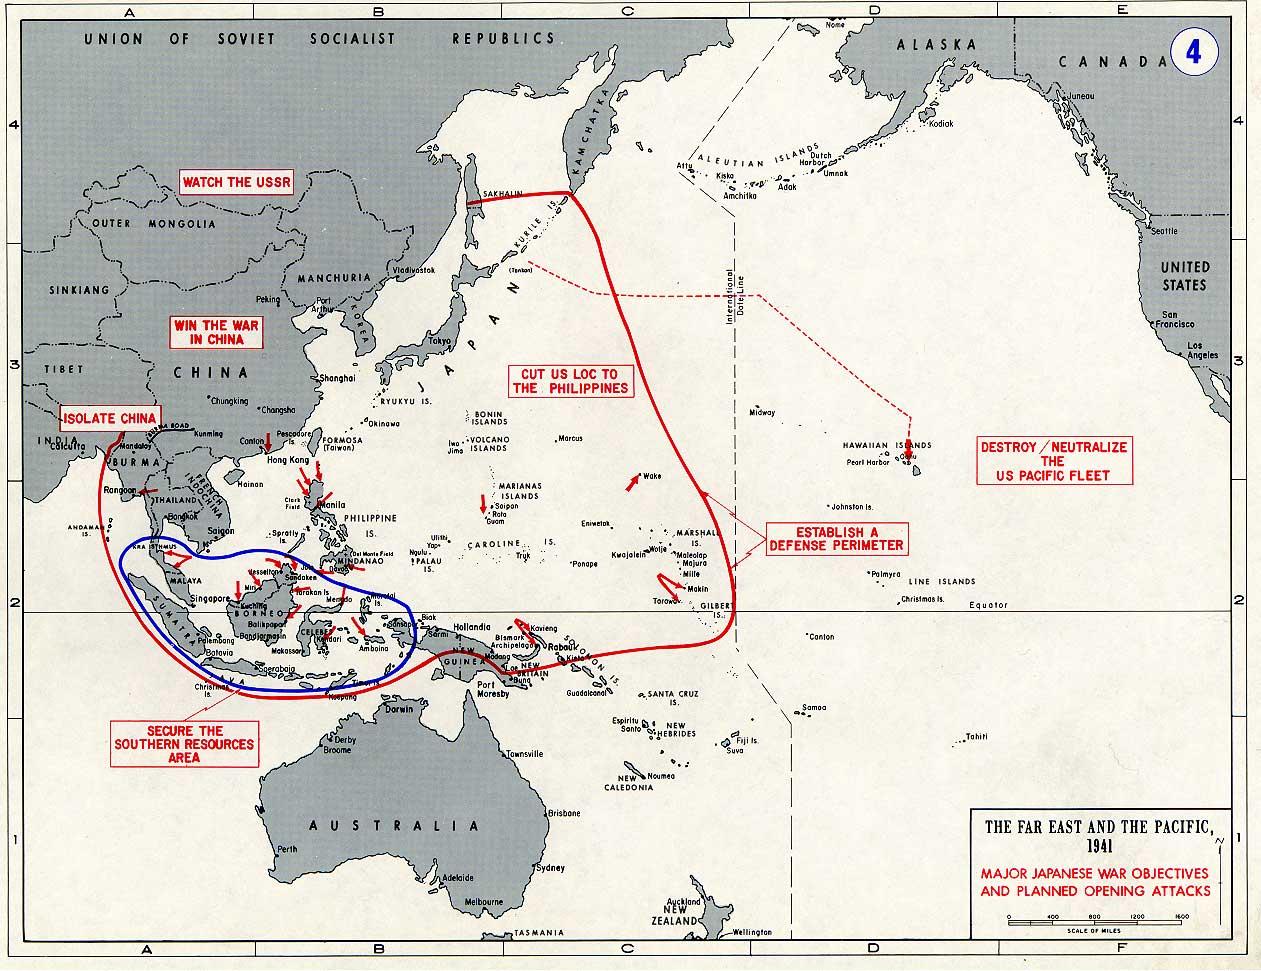 Map noting Japanese objectives in the opening stages of the Pacific War in late 1941 to early 1942